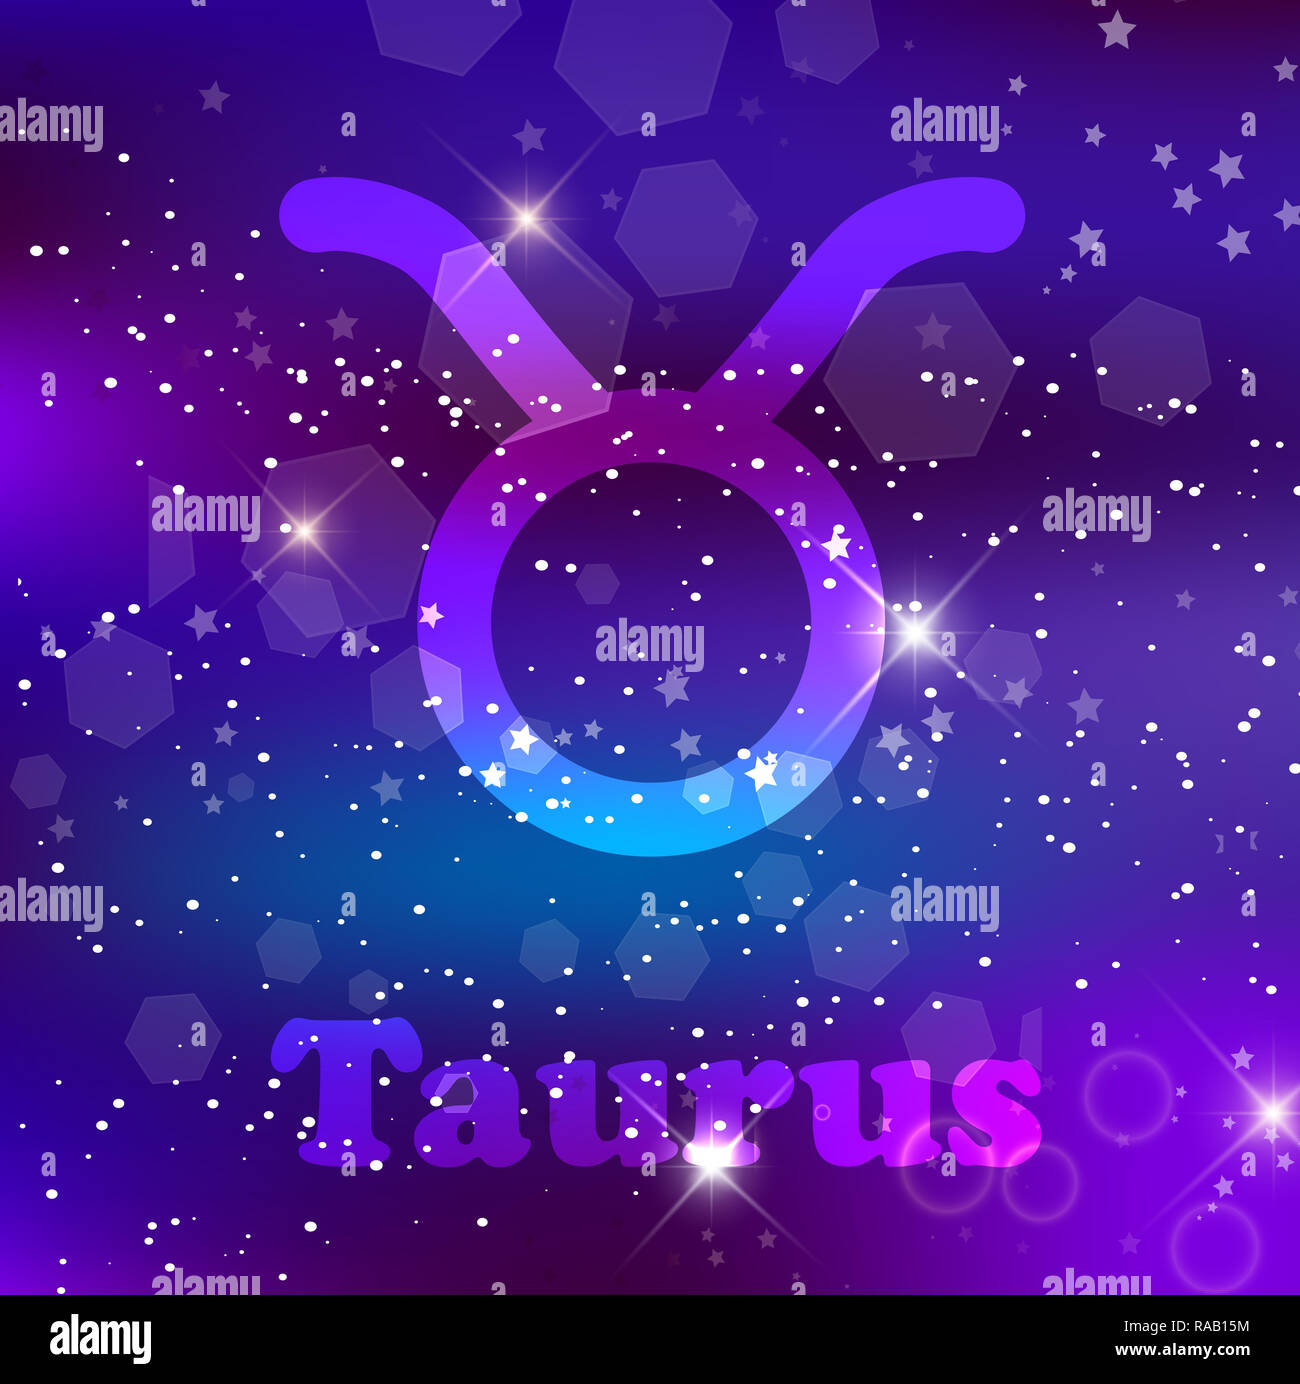 29900 Taurus Zodiac Sign Stock Photos Pictures  RoyaltyFree Images   iStock  Zodiac signs